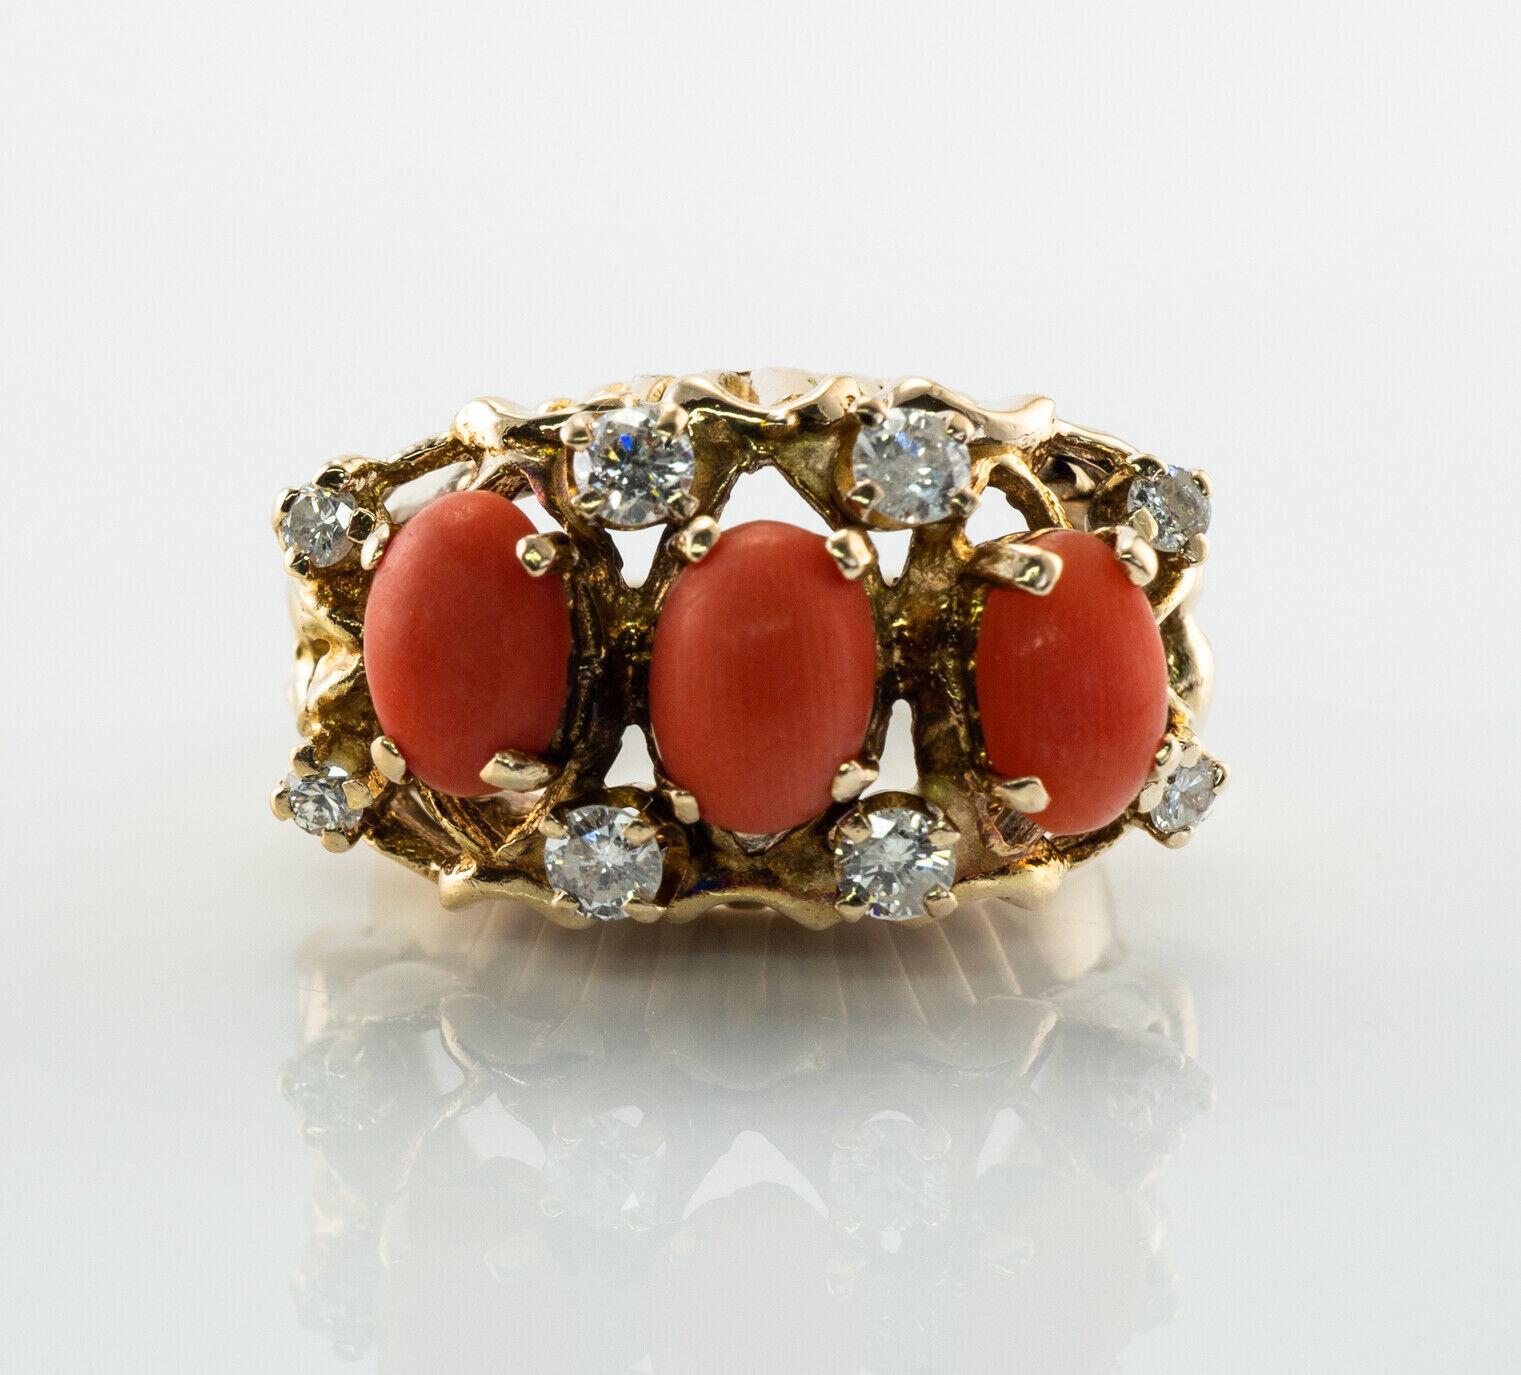 This vintage ring is finely crafted in solid 14K Yellow Gold and set with natural Corals and genuine diamonds.
Each coral cabochon measures 7mm x 5mm. These corals are a high quality with a beautiful color.
Eight round brilliant cut diamonds are SI2